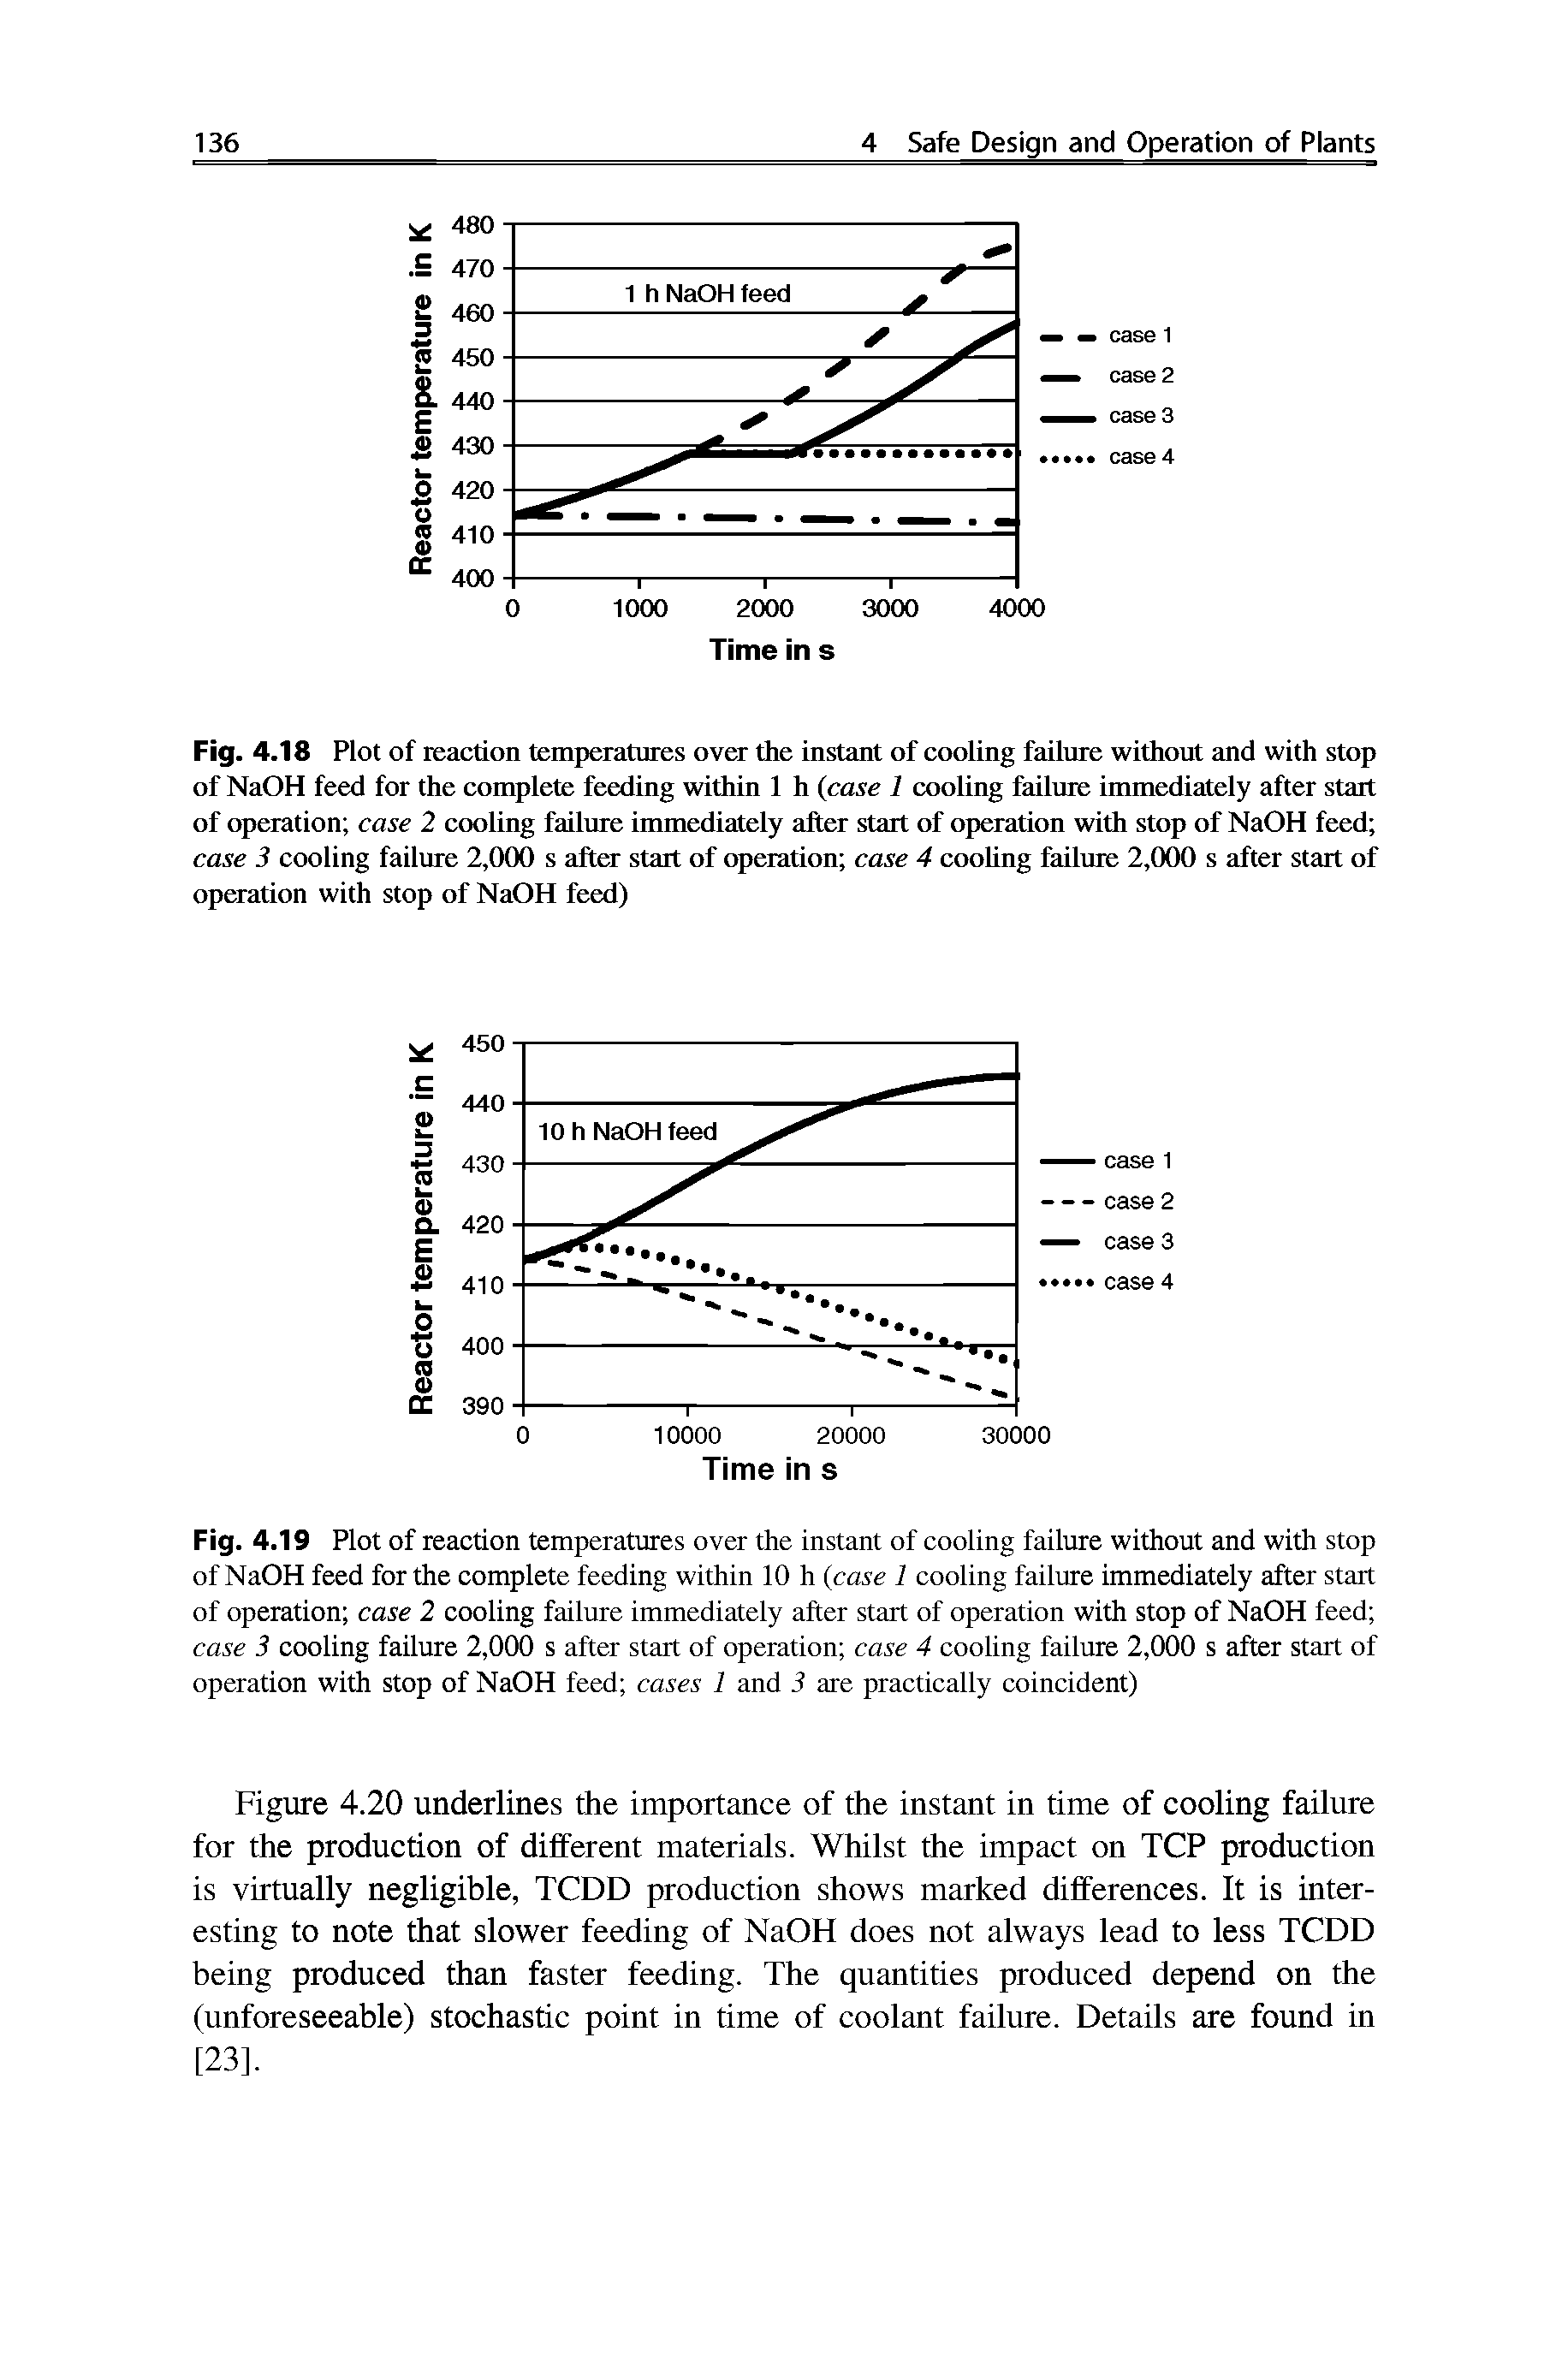 Fig. 4.18 Plot of leaction temperatures over the instant of cooling failure without and with stop of NaOH feed for the complete feeding within 1 h (case 1 cooling failure immediately after start of operation case 2 cooling failure immediately after start of operation with stop of NaOH feed case 3 cooling failure 2,000 s after start of operation case 4 cooling failure 2,000 s after start of operation with stop of NaOH feed)...